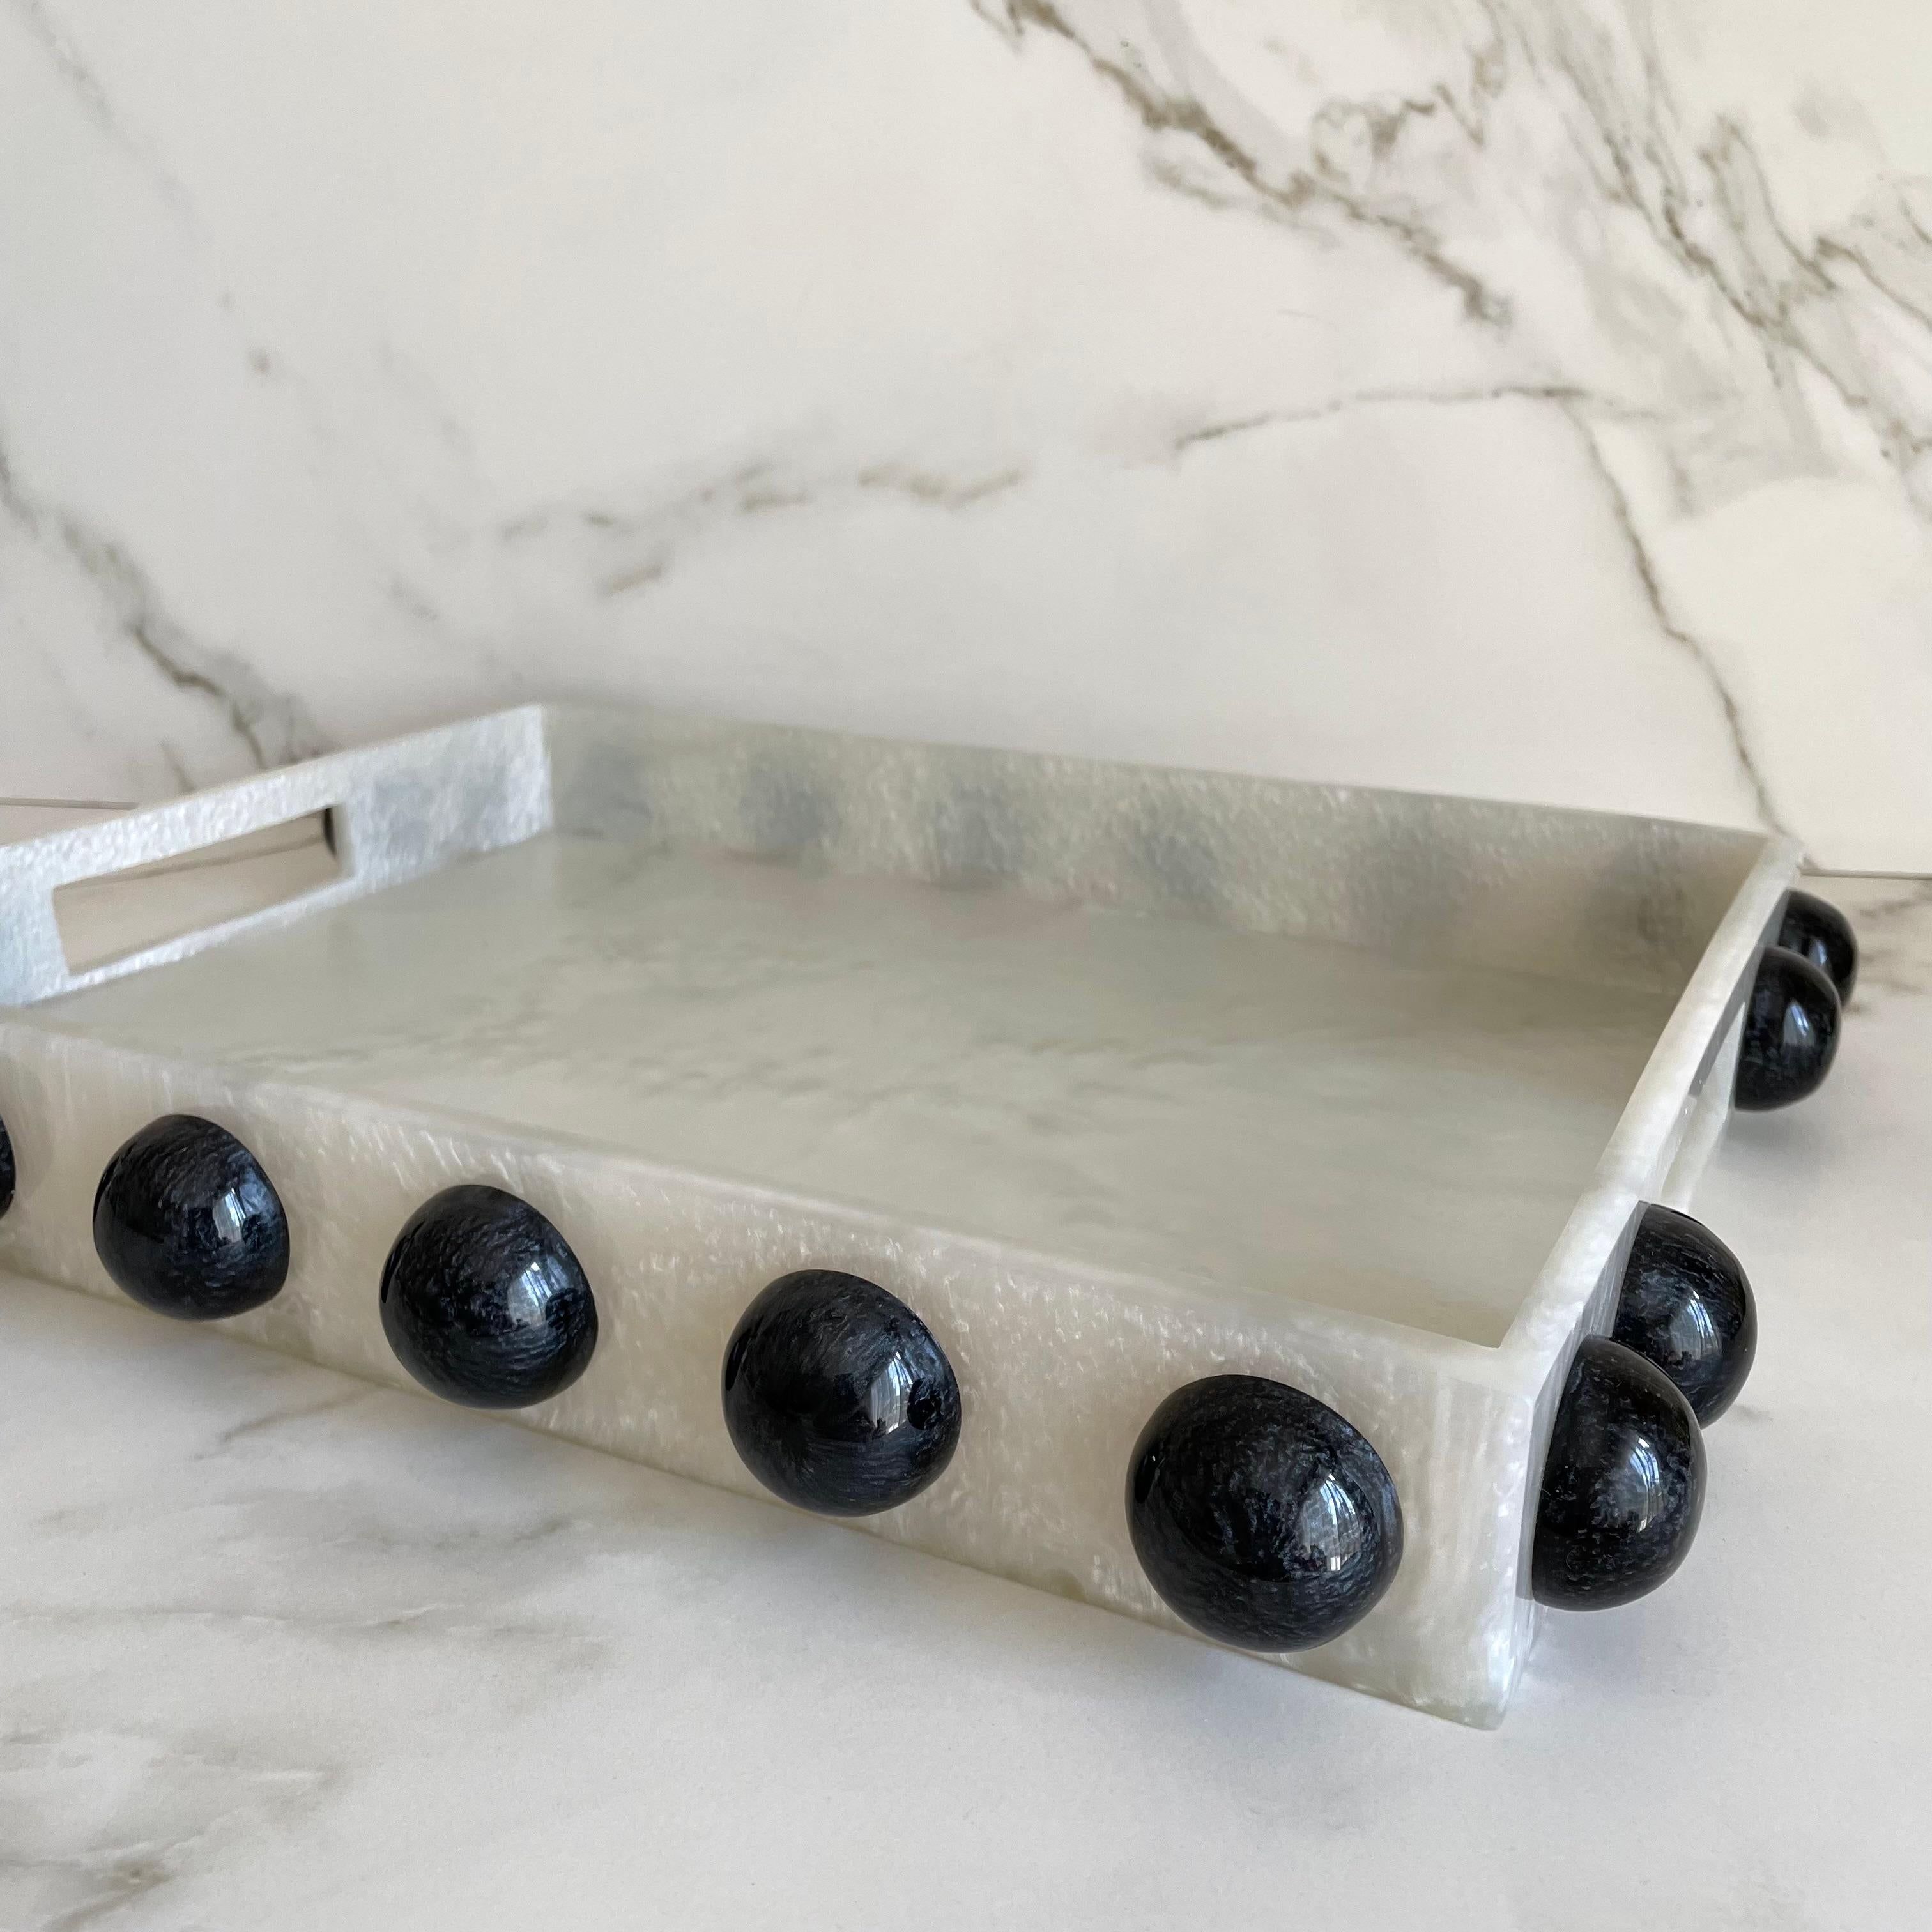 Our rectangle tray has clean lines, polished finish and is embellished with semi spheres that make it one-of-a-kind. This modern tray is just the thing for serving breakfast in bed, cocktails on the patio or just as a statement piece in any